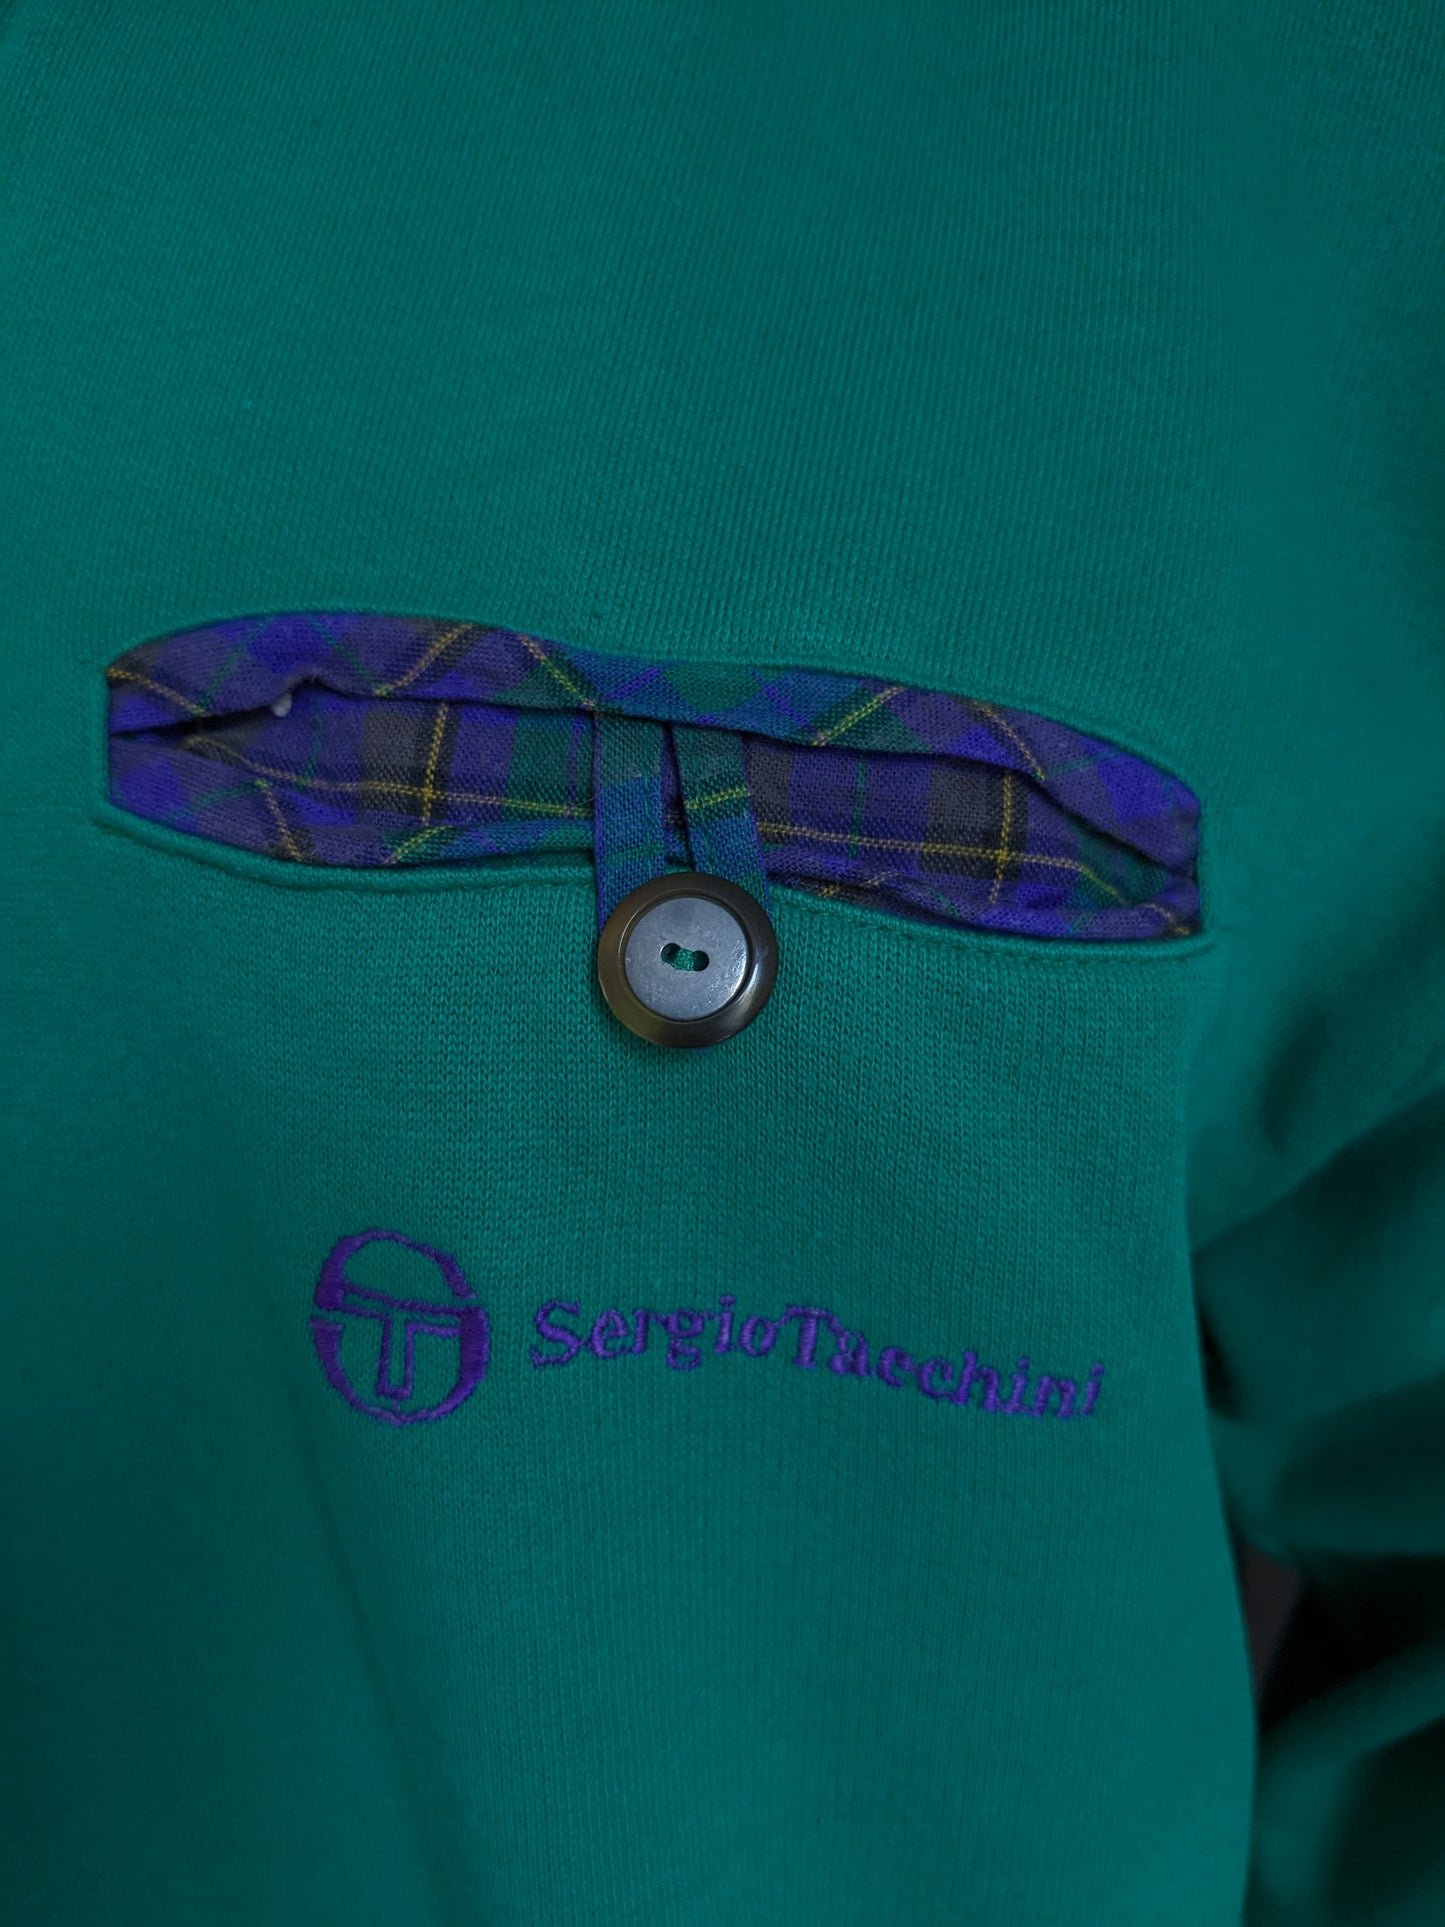 Vintage Sergio Tacchini polo sweater with elastic band. Green purple colored. Size XL.